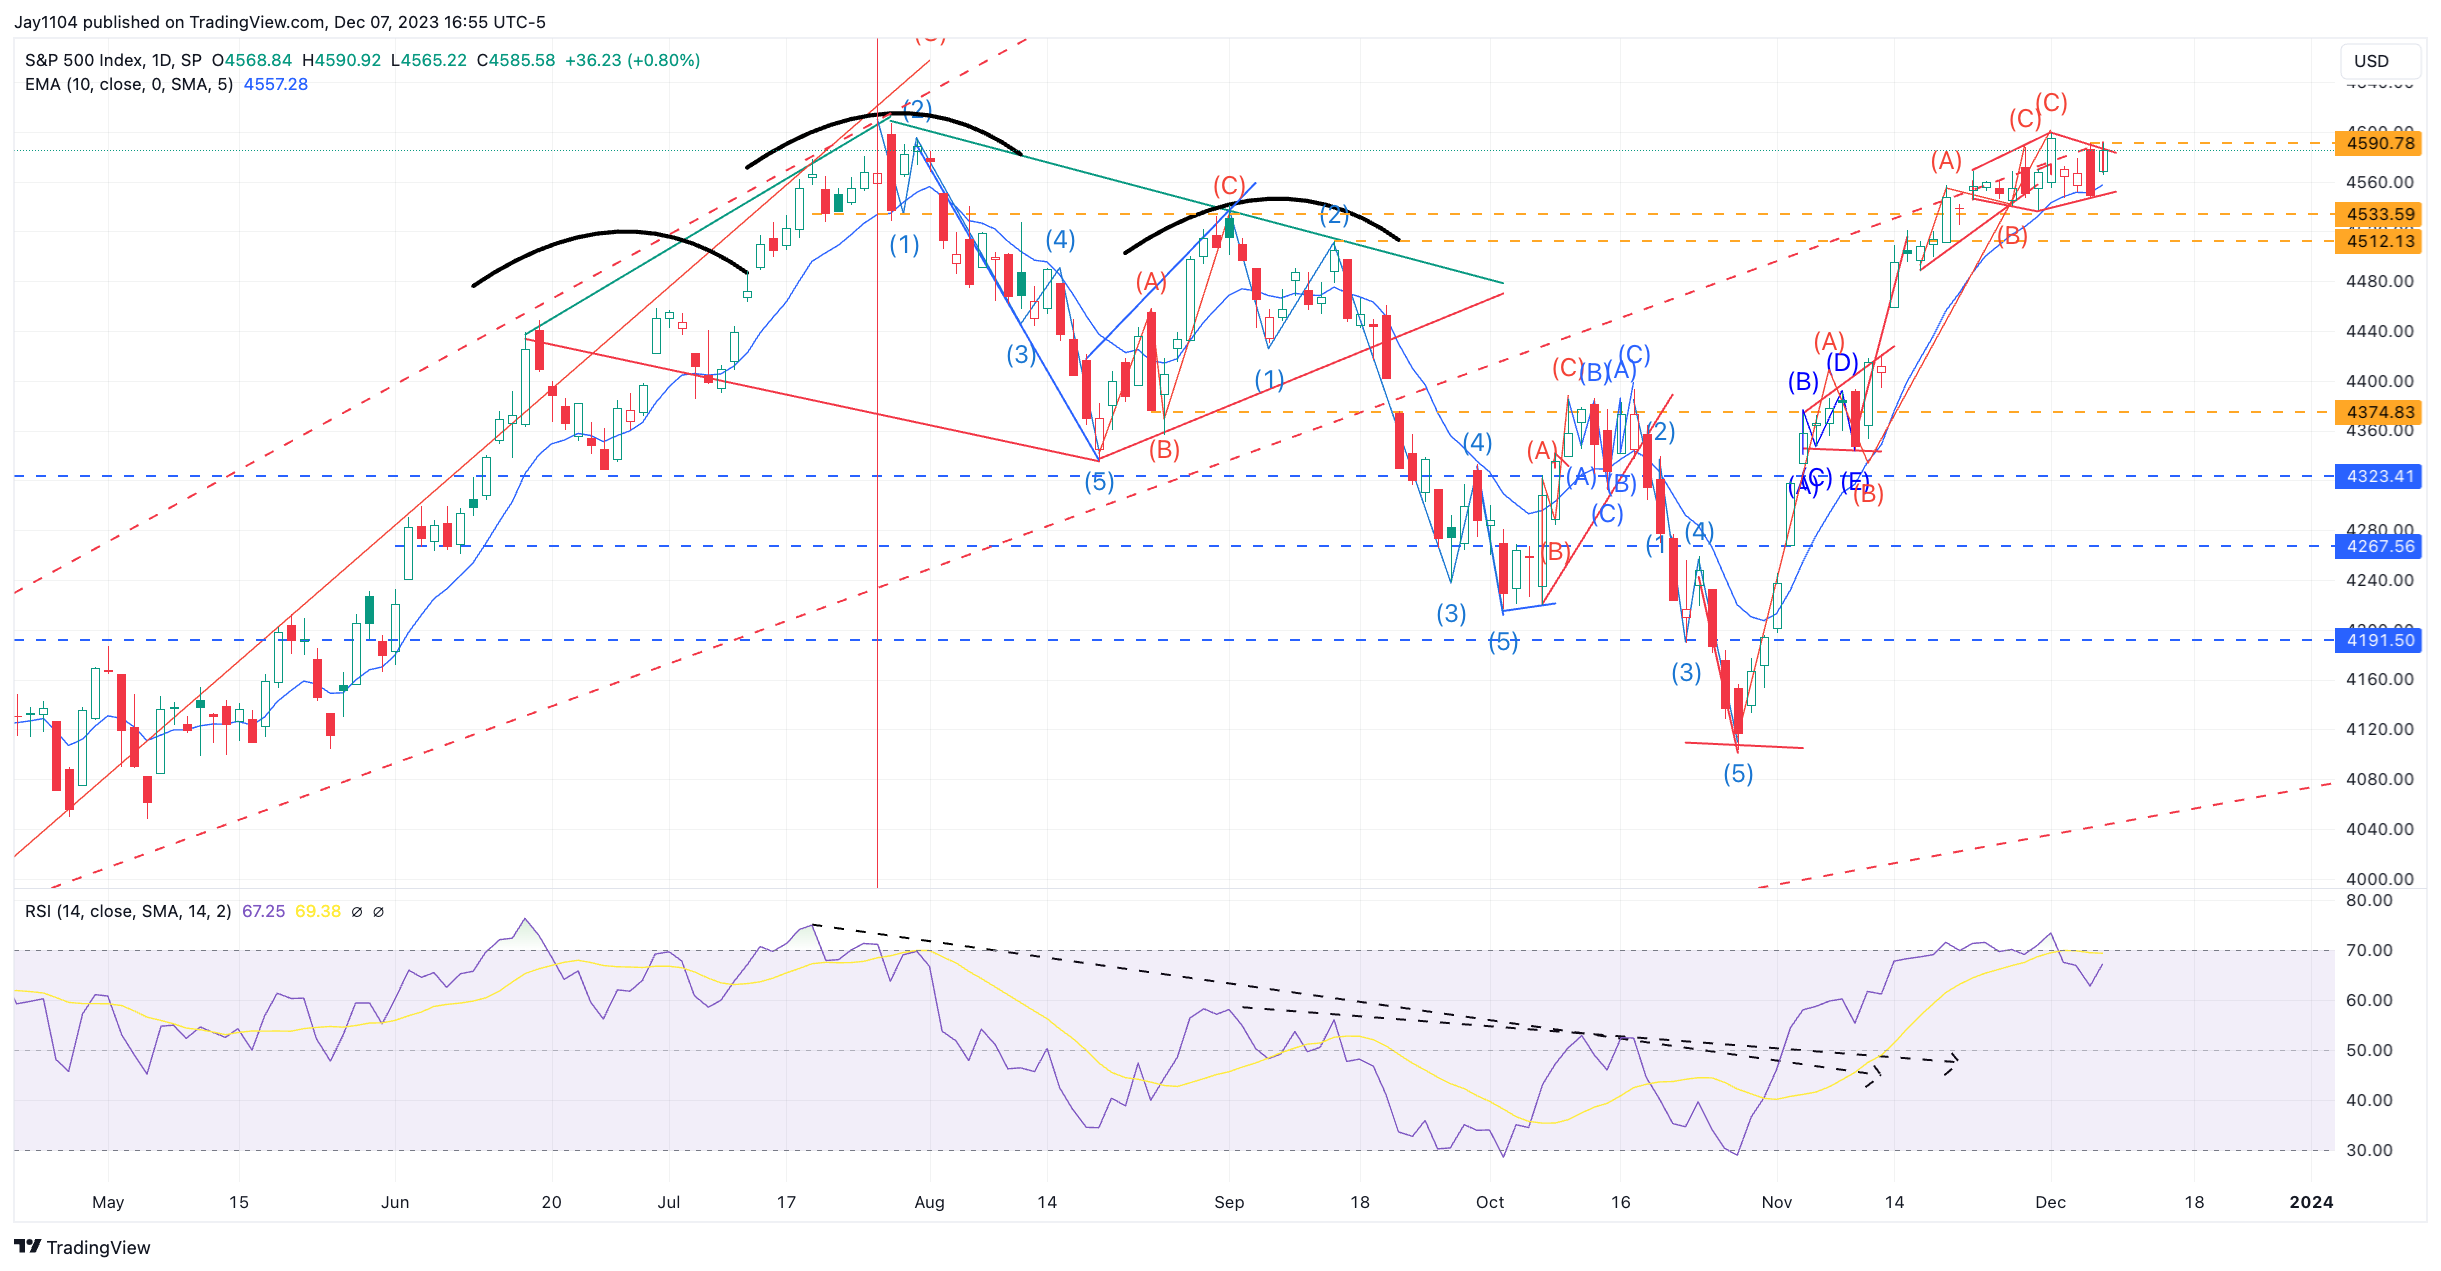 SPX Index-Daily Chart